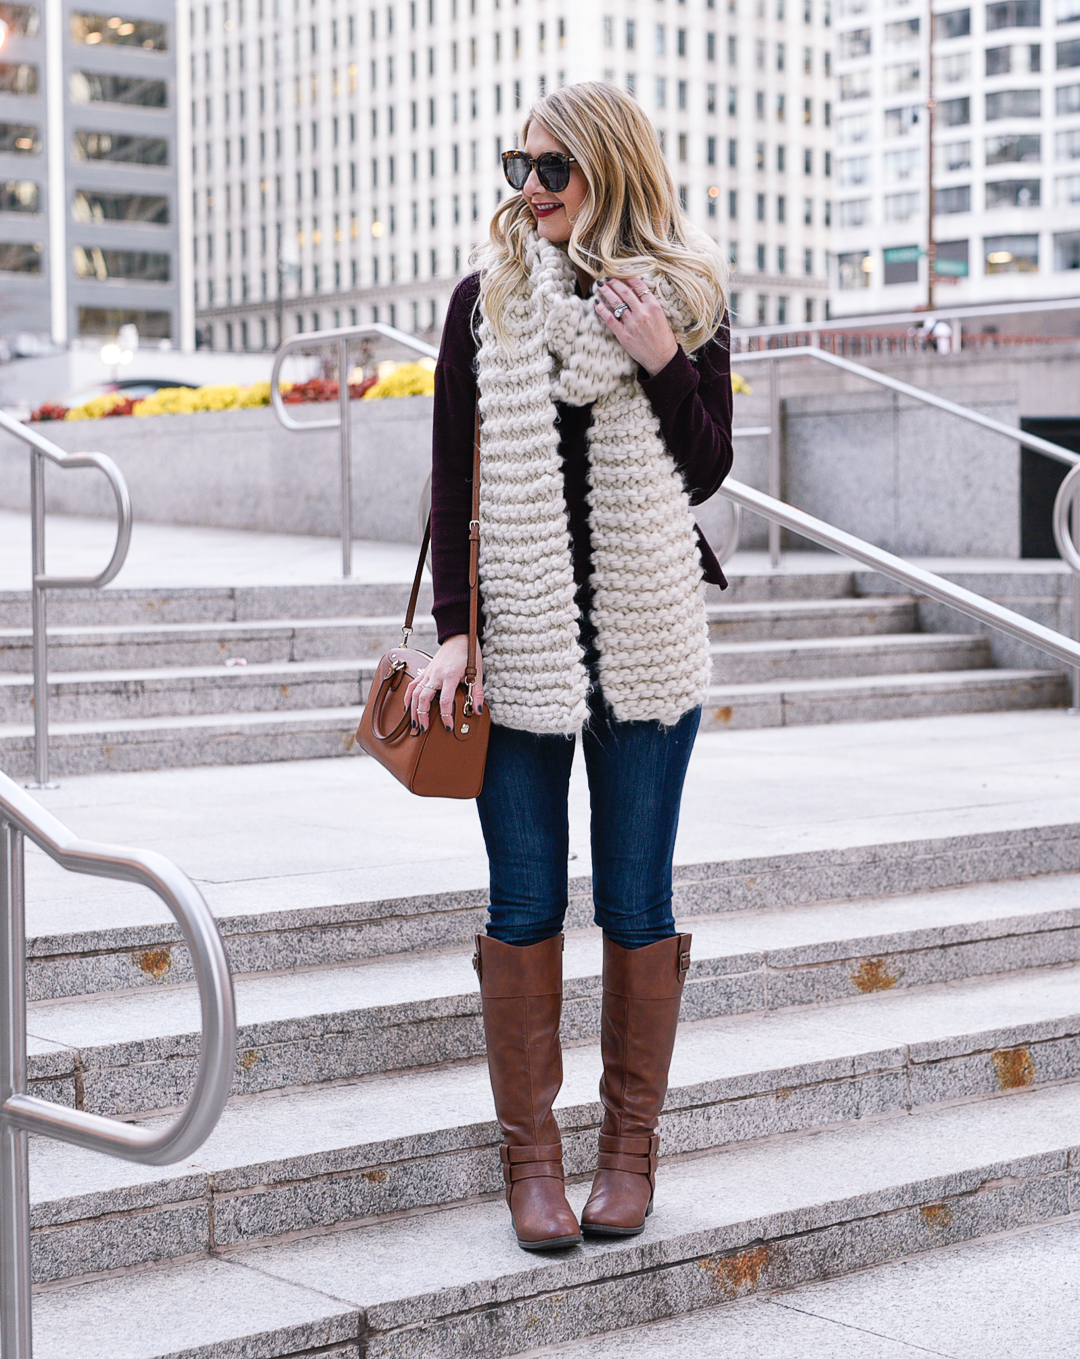 Fall outfit idea: riding boots, burgundy turtleneck, and knit scarf. 